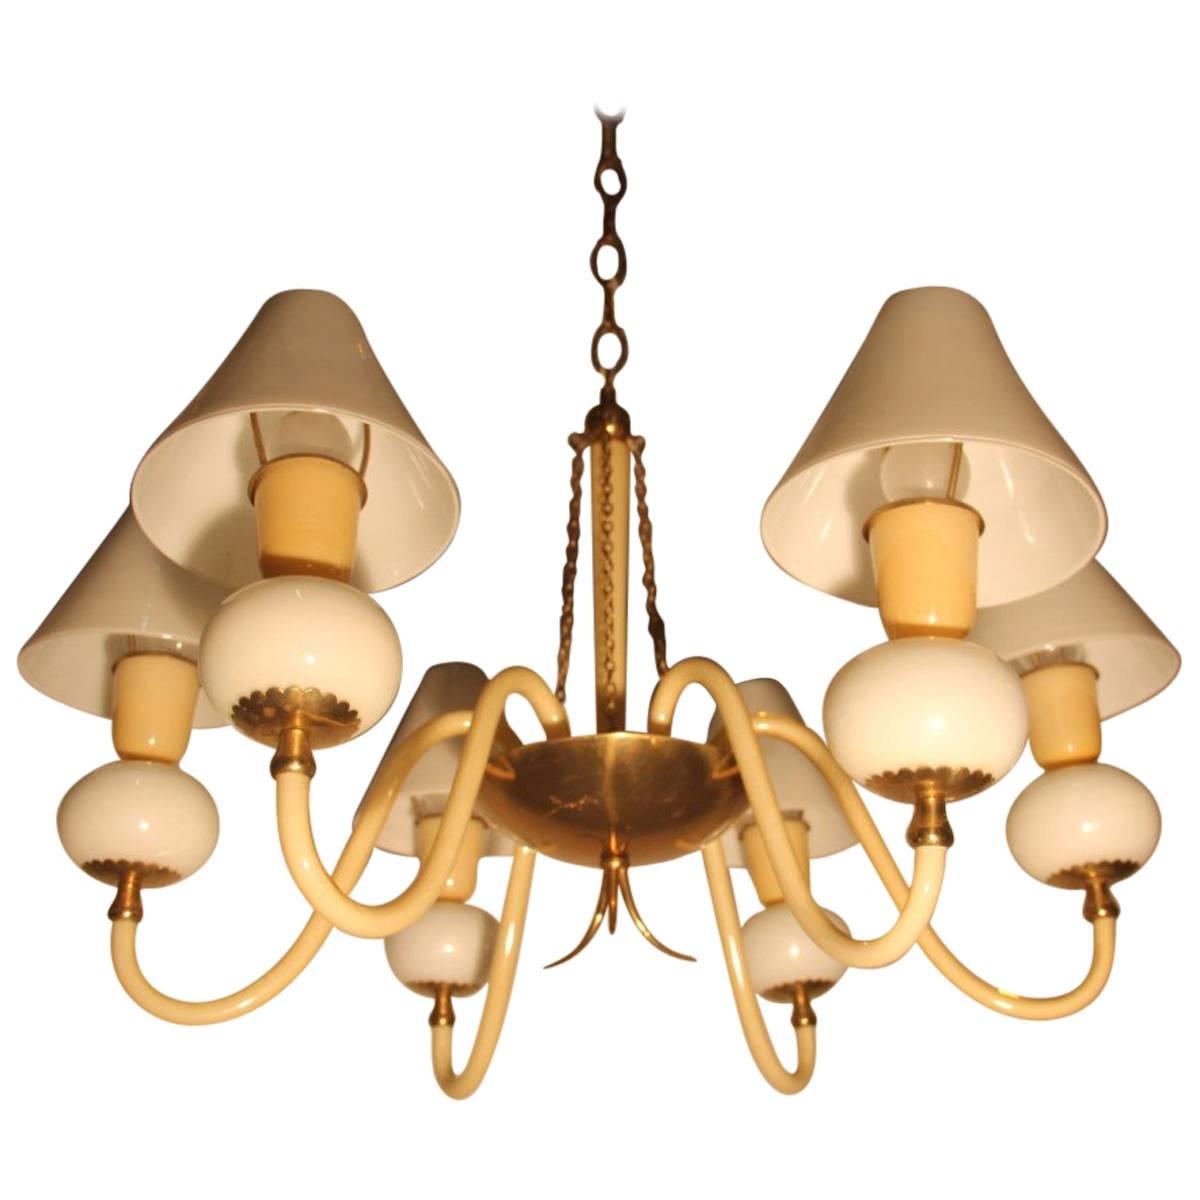 Elegant Refined Chandelier Murano Glass Art Very Special, 1940s For Sale